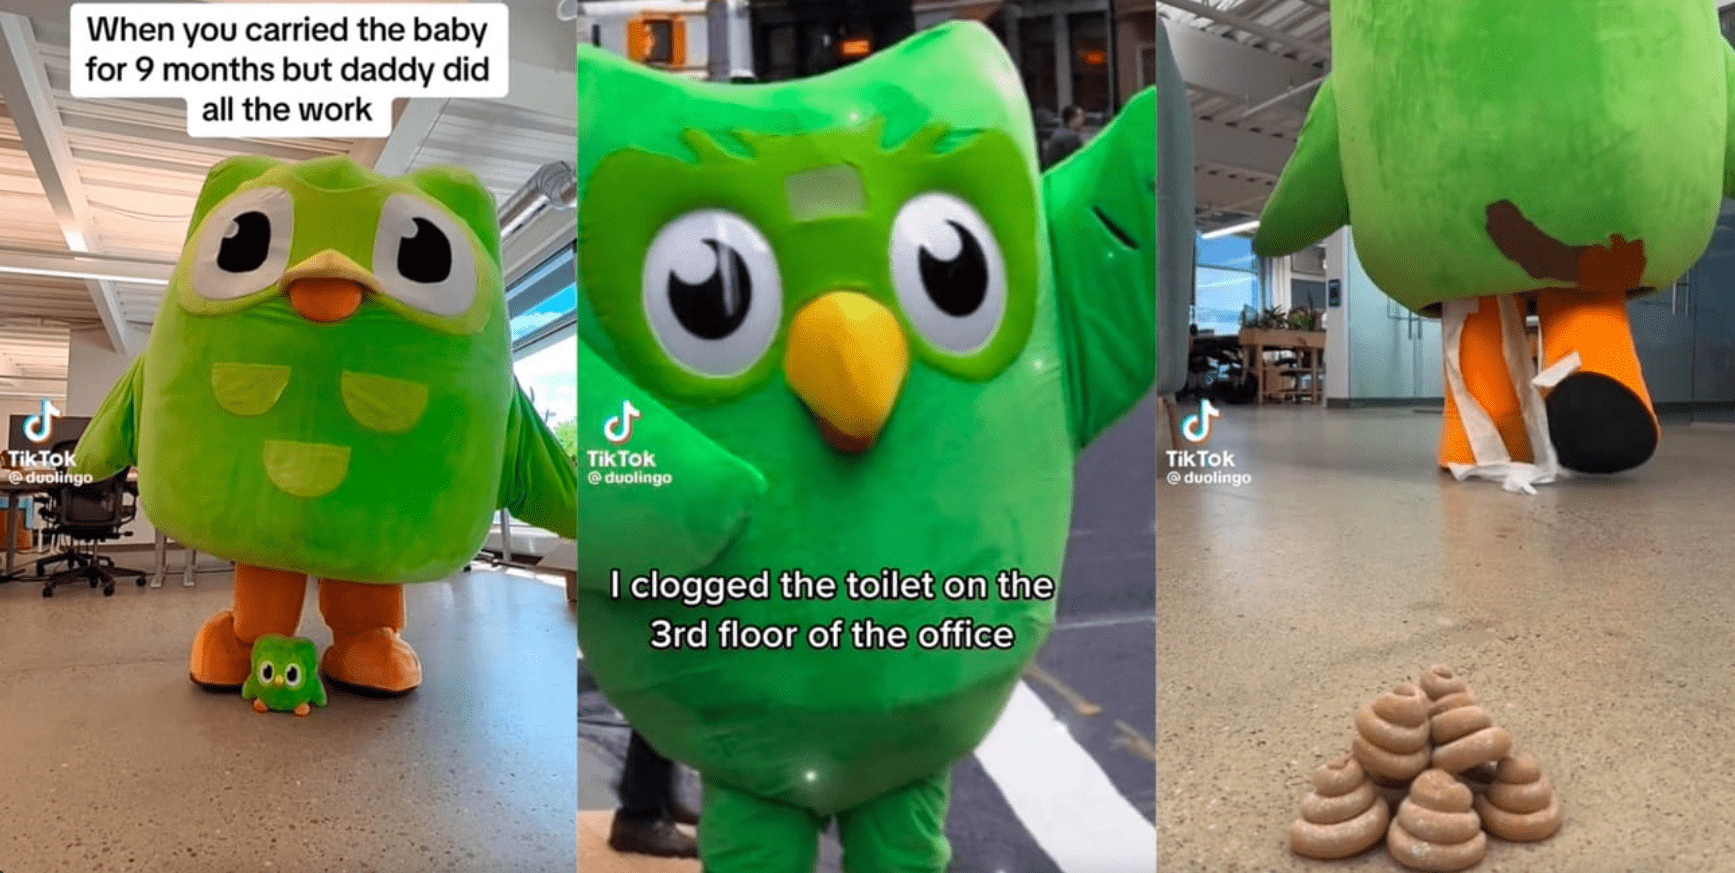 Three TikTok screenshots showing a giant green owl costume with the words, When you carried the baby for 9 months but daddy did all the work; I clogged the toilet on the 3rd floor of the office. Final image shows the owl having deposited fake poop.